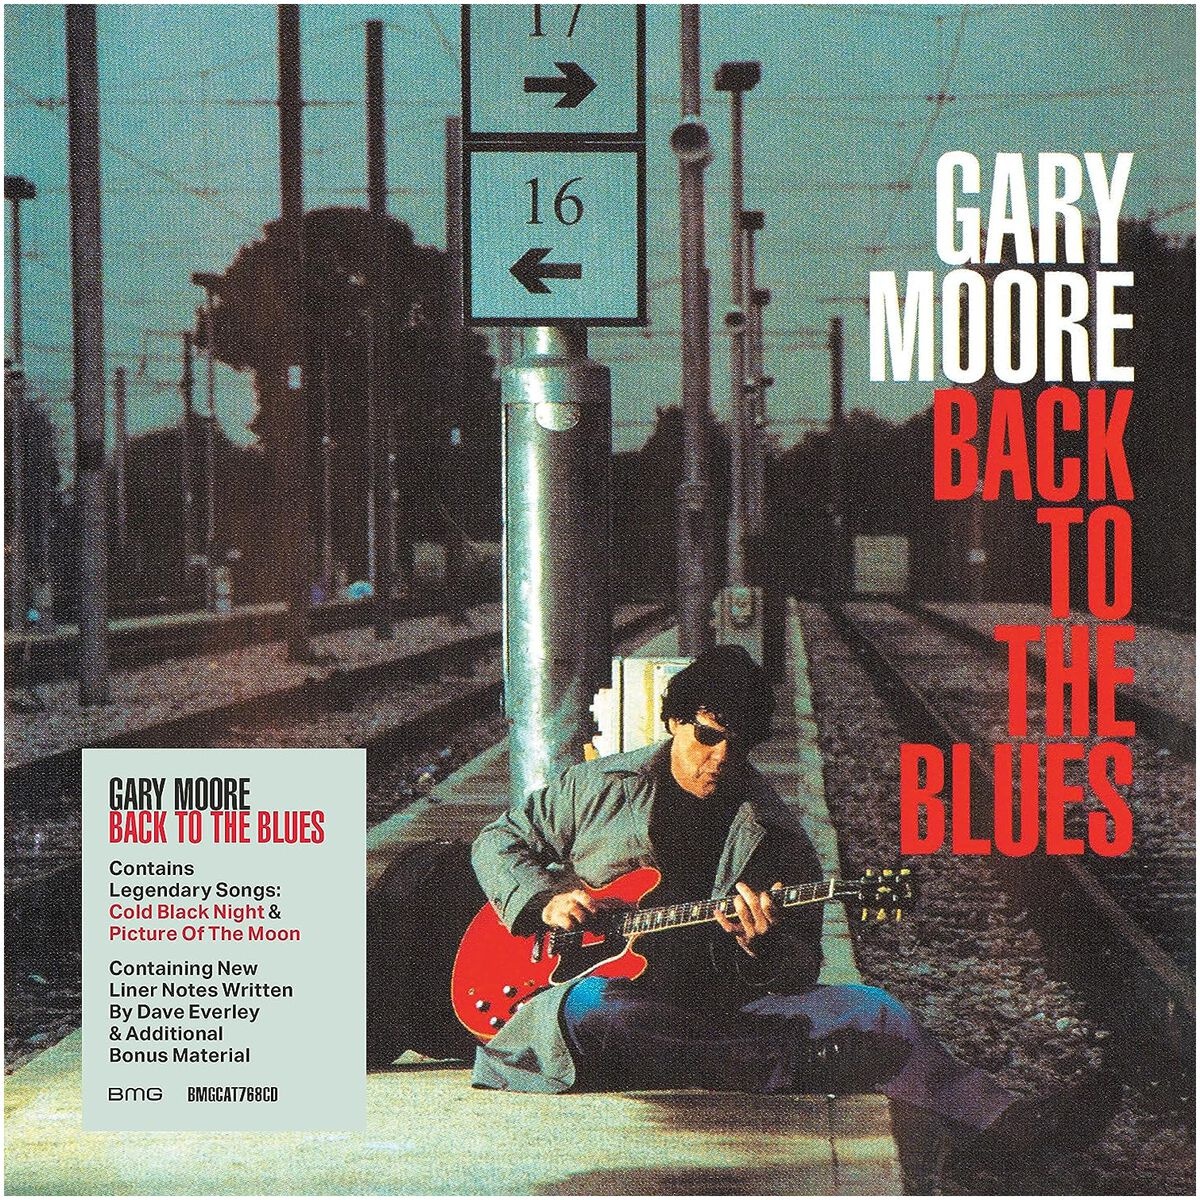 Back to the blues von Gary Moore - CD (Digipak, Re-Release)